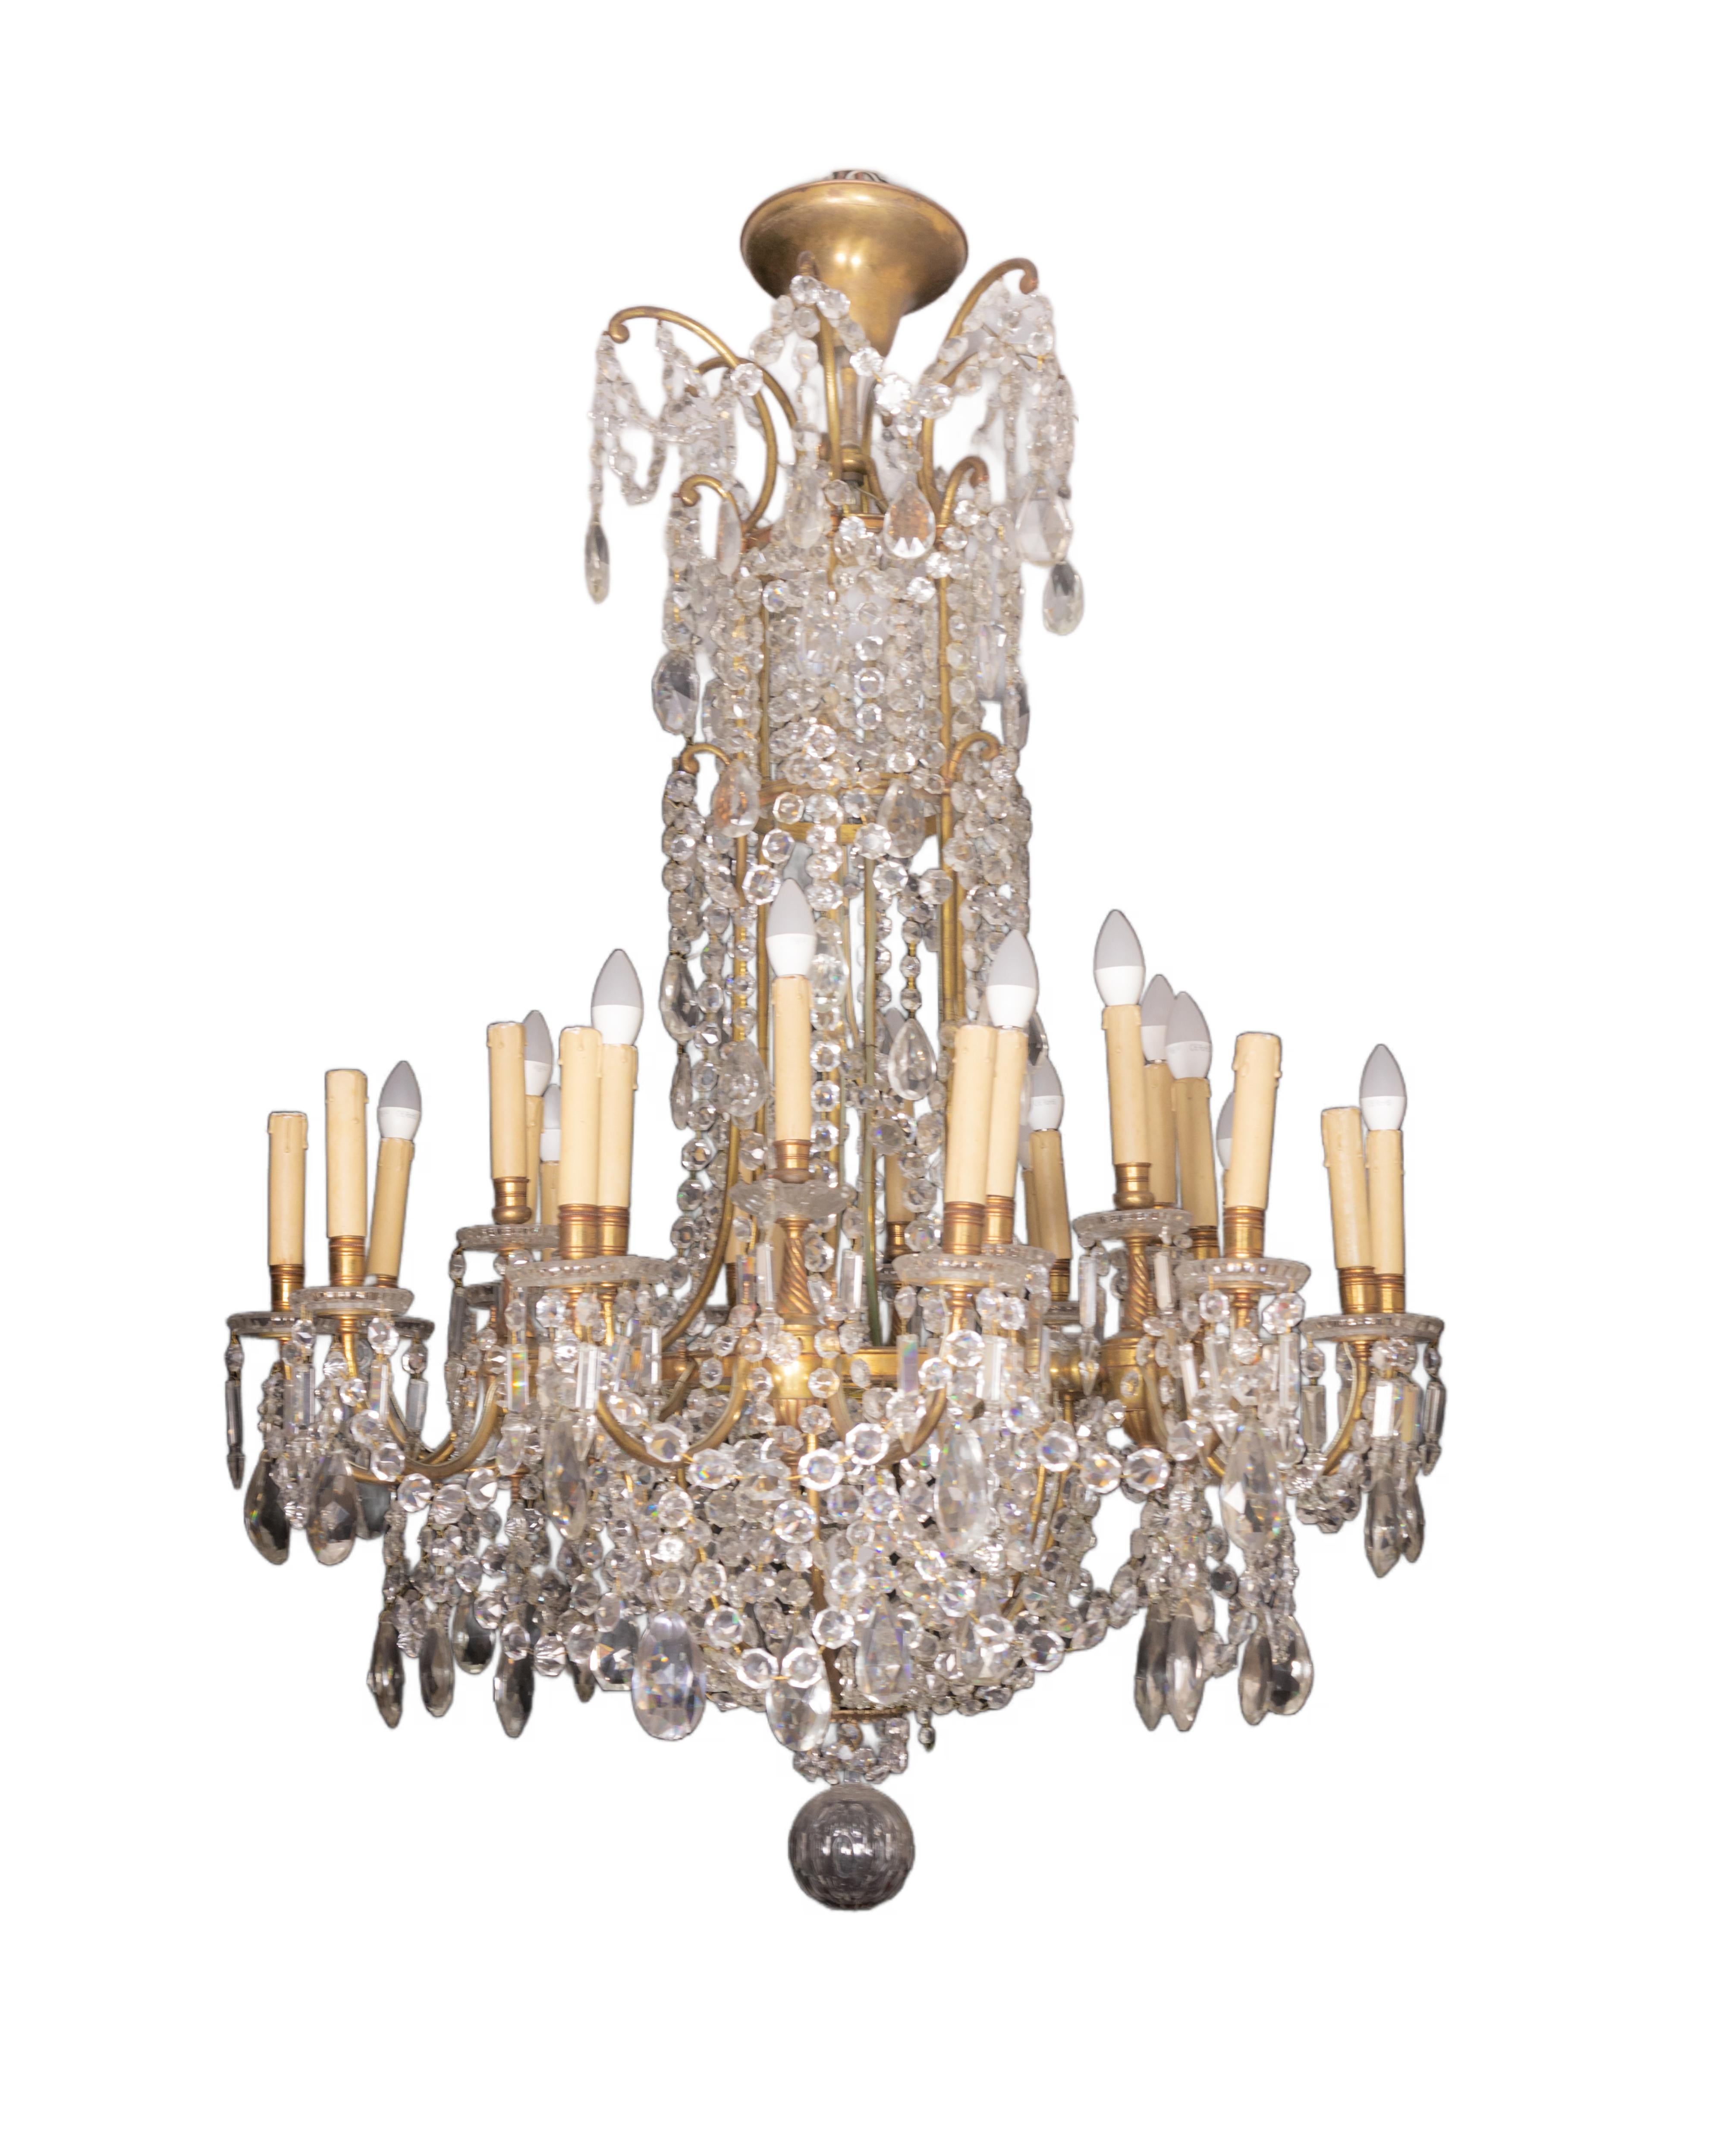 What is a Maria Theresa chandelier?